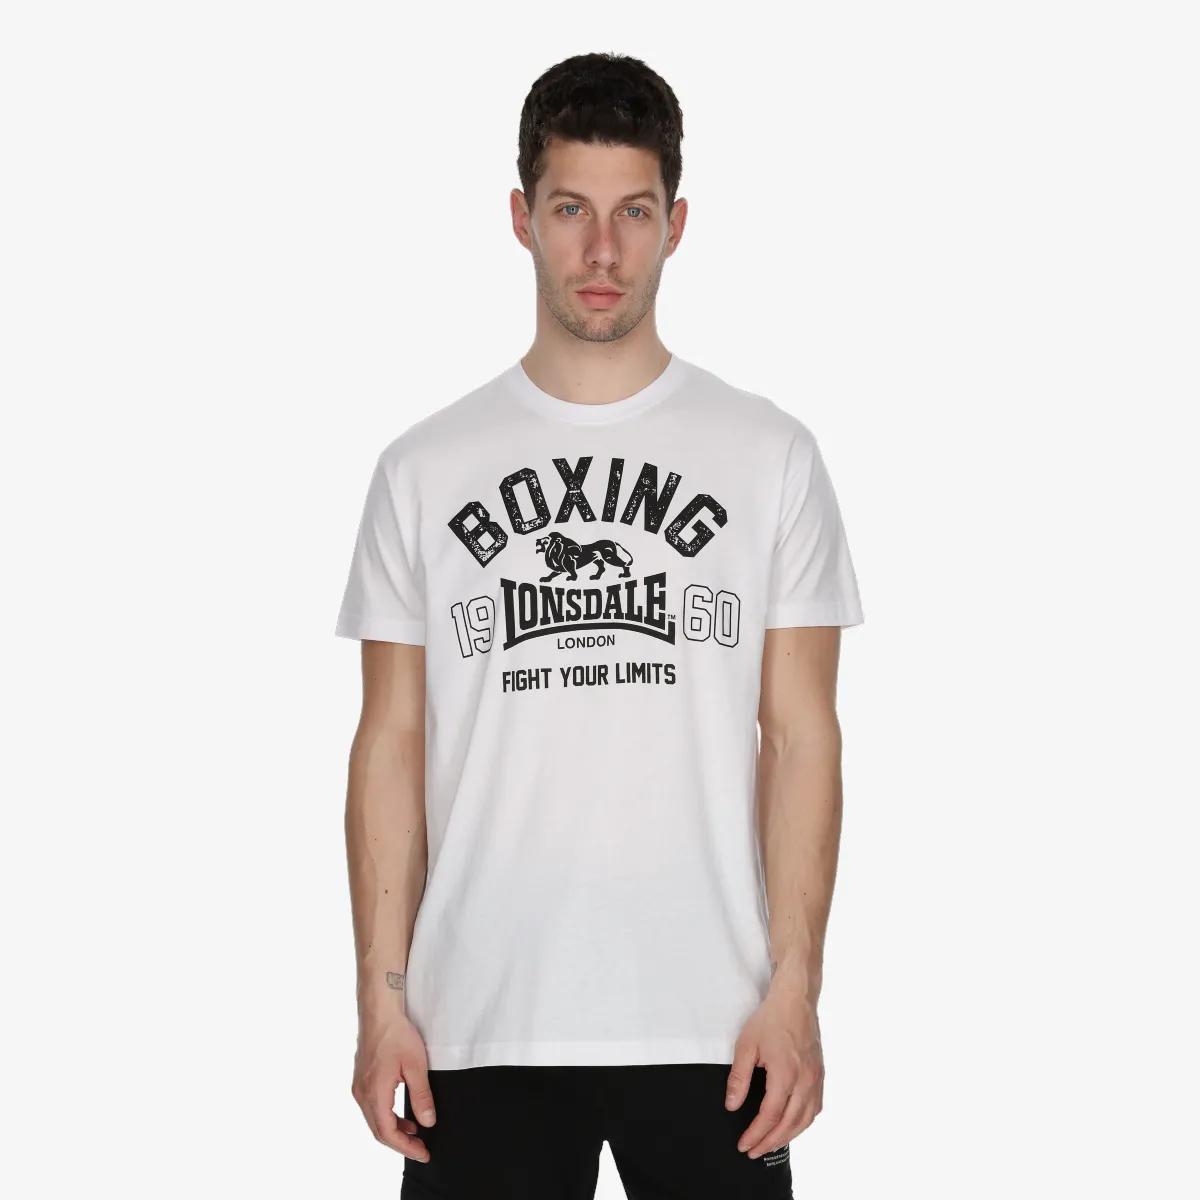 LONSDALE T-SHIRT Boxing 